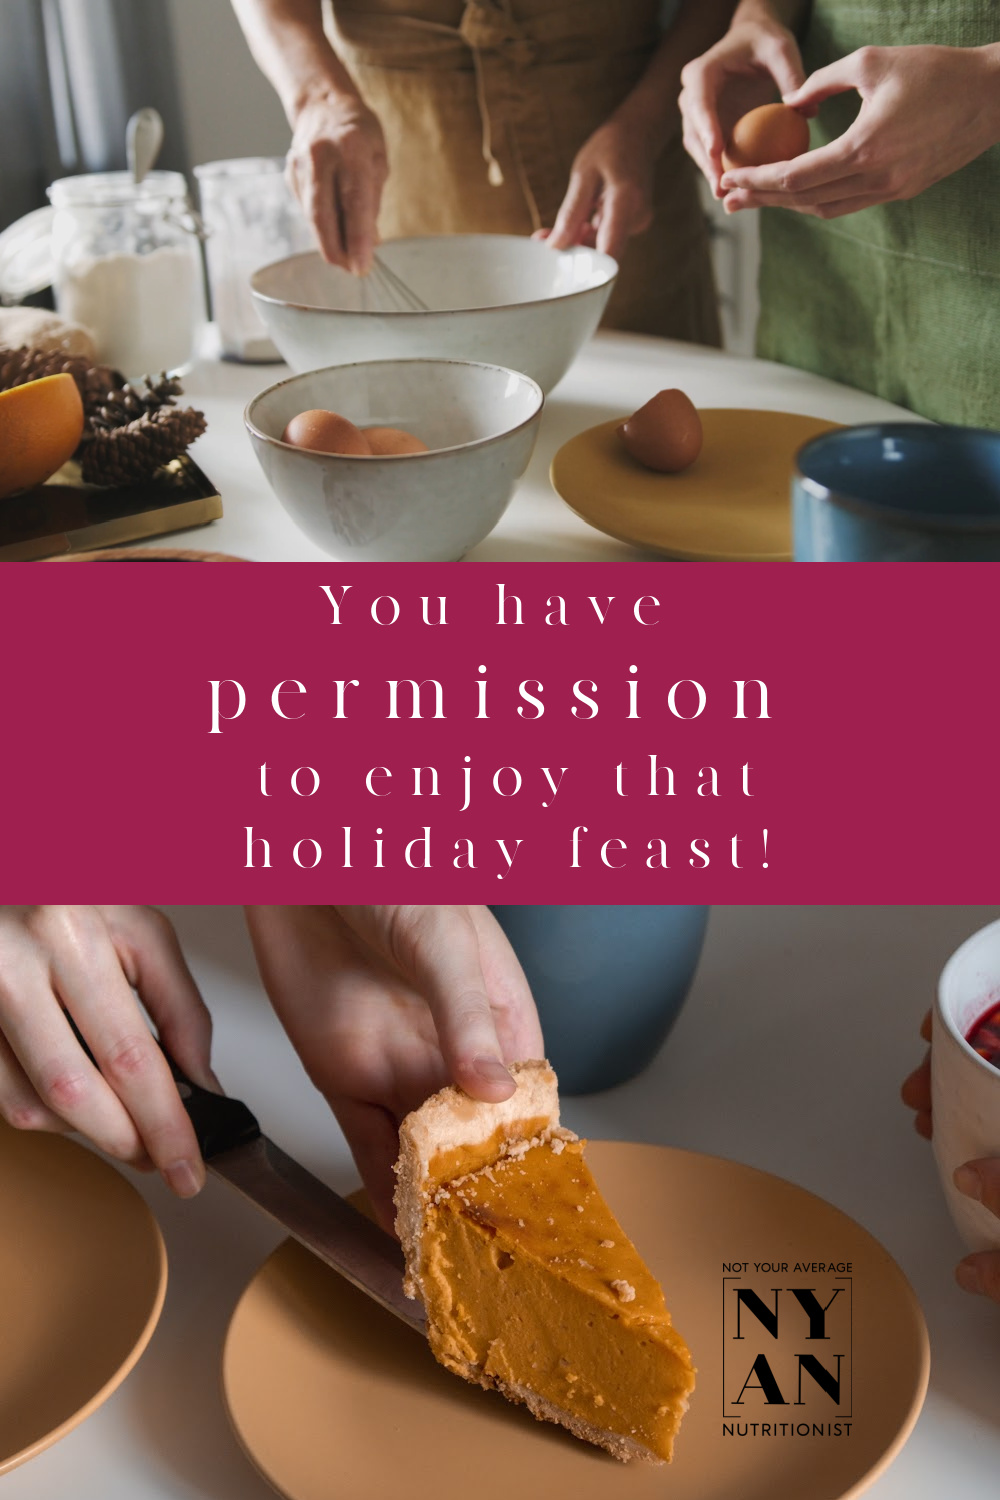 You have permission to enjoy that holiday feast!